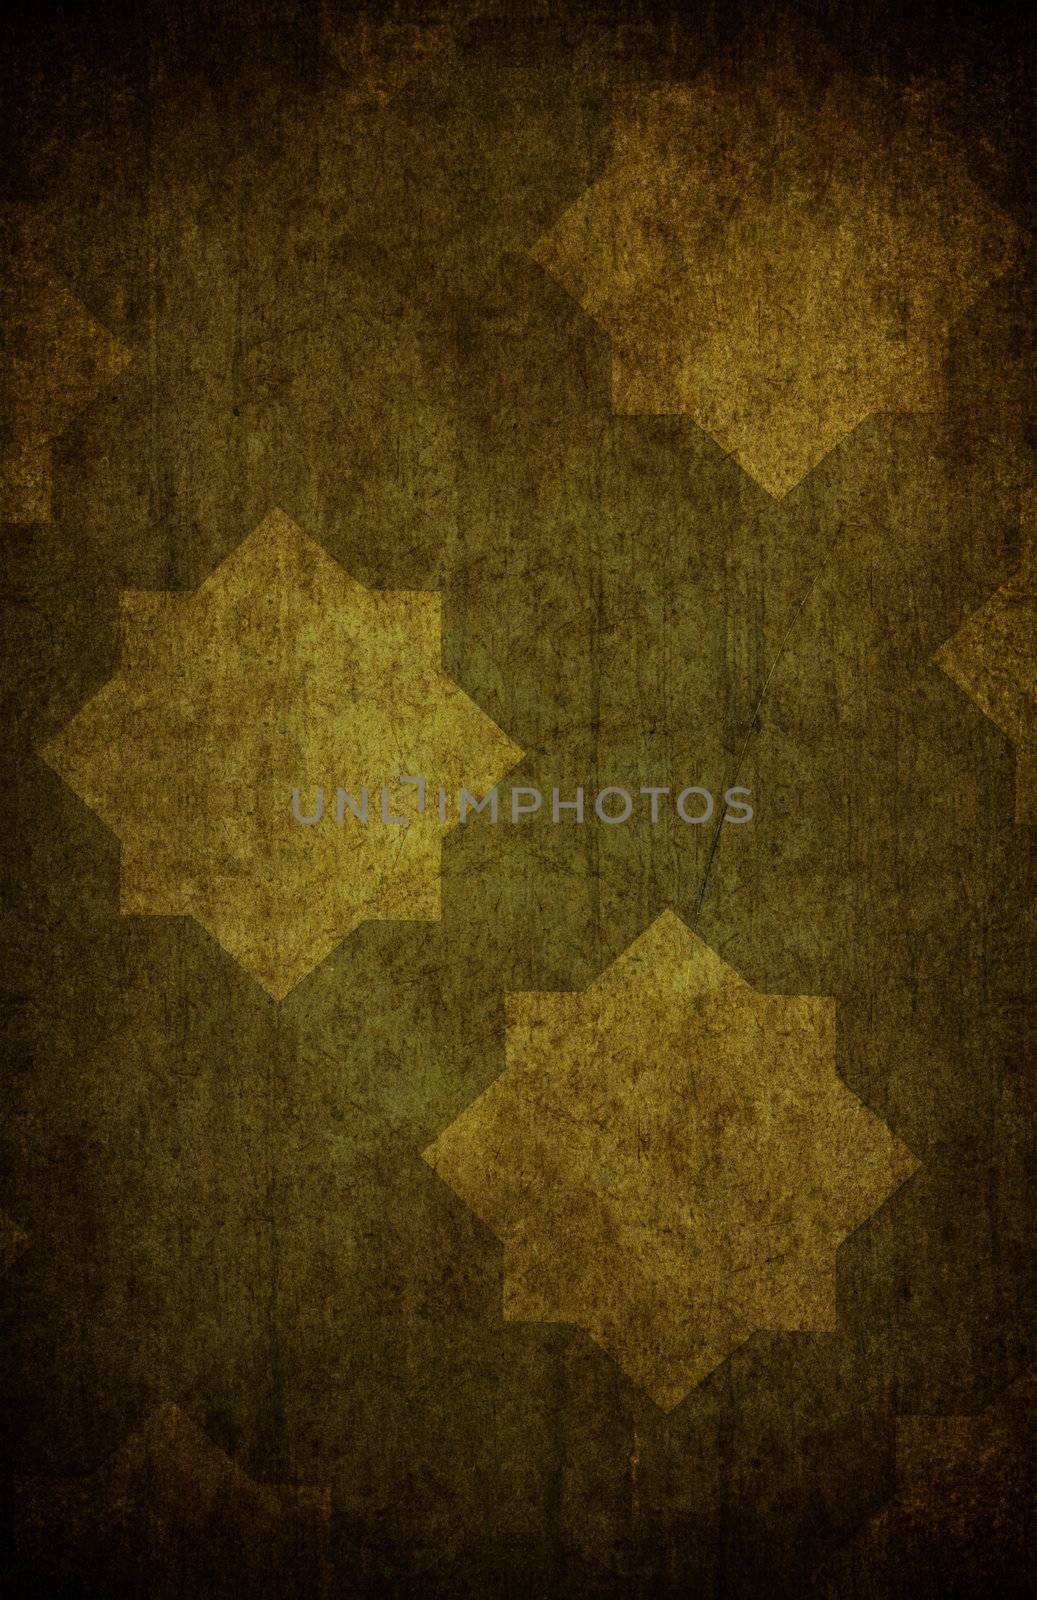 A cracked grunge concrete background with white stars